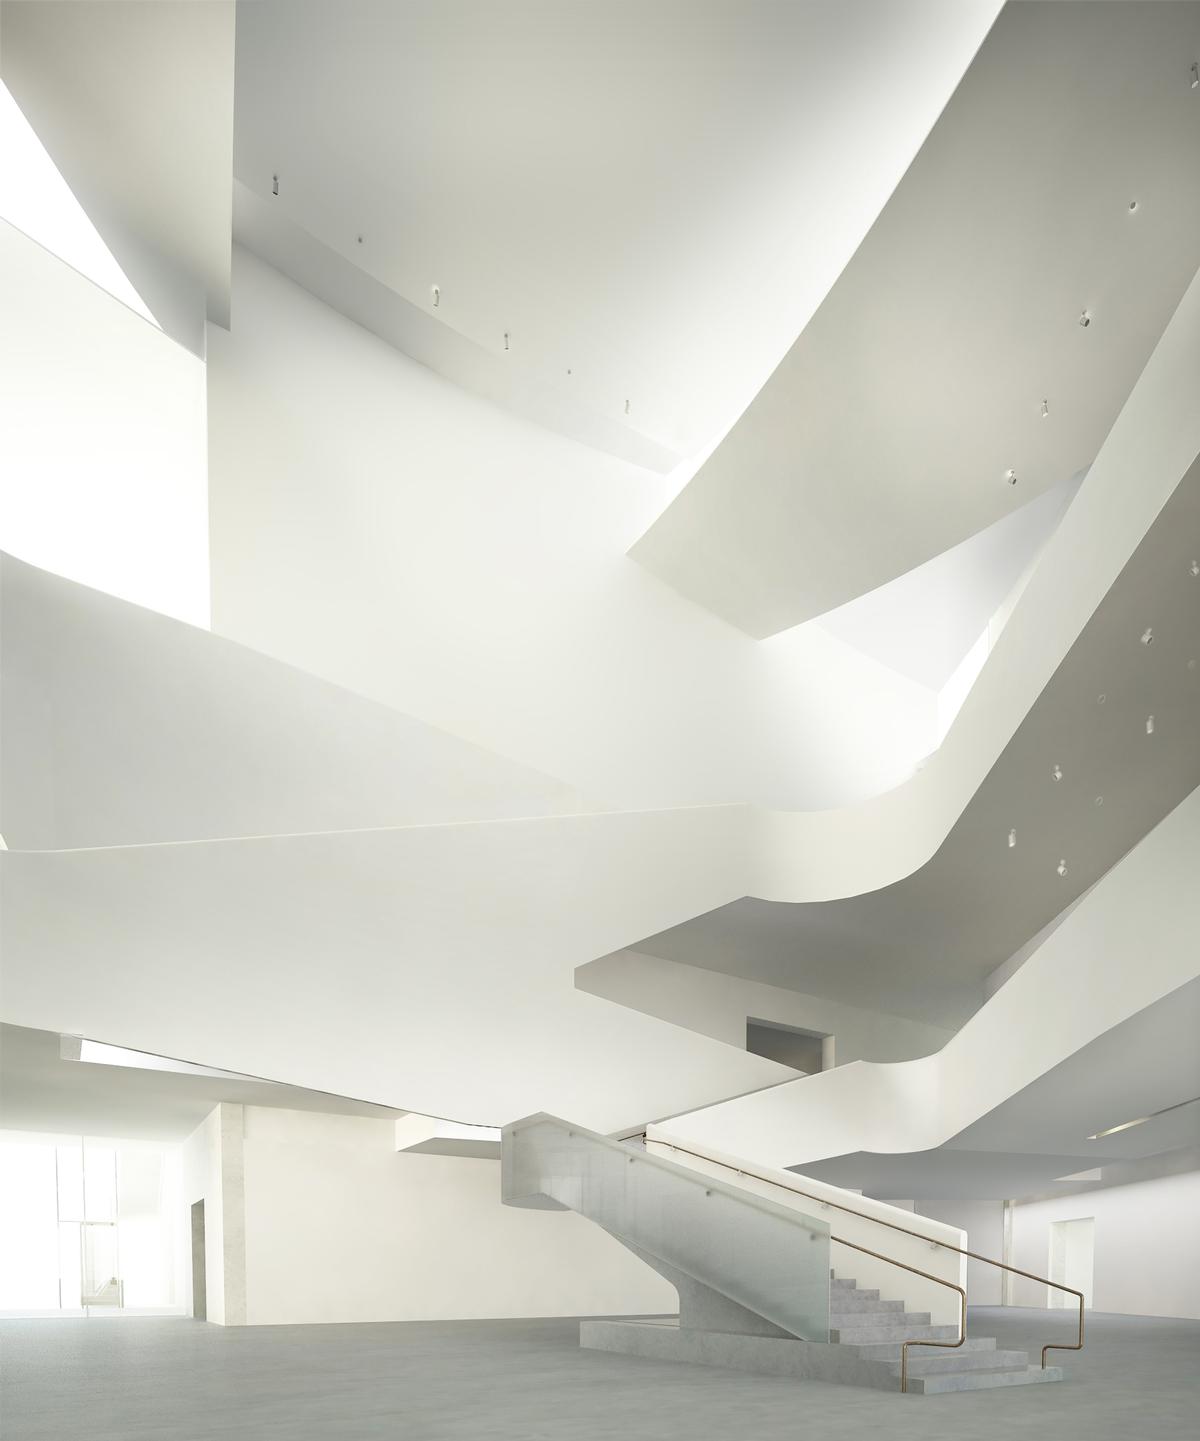 Organised horizontally on two levels, the gallery rooms are centered around a triple-height forum / Steven Holl Architects